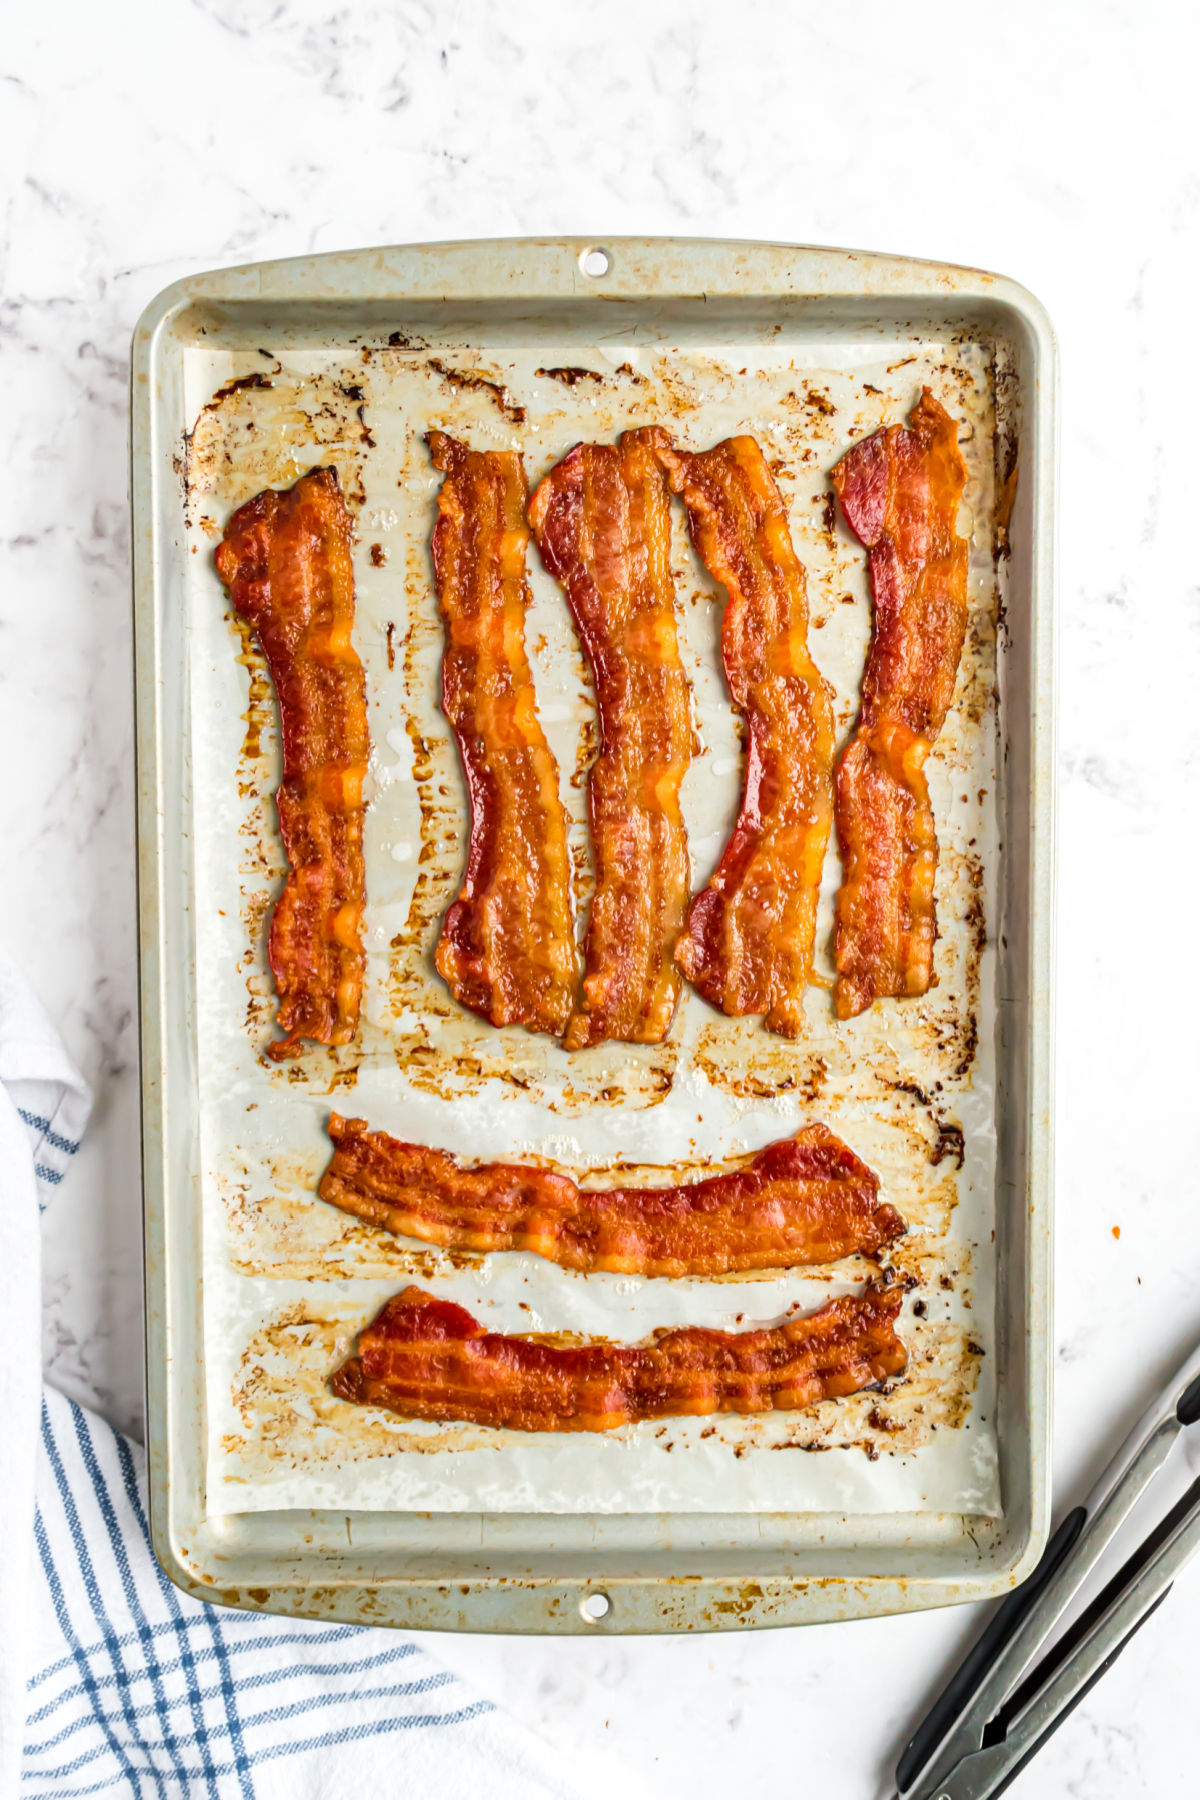 Bacon cooked on baking sheet with parchment paper.